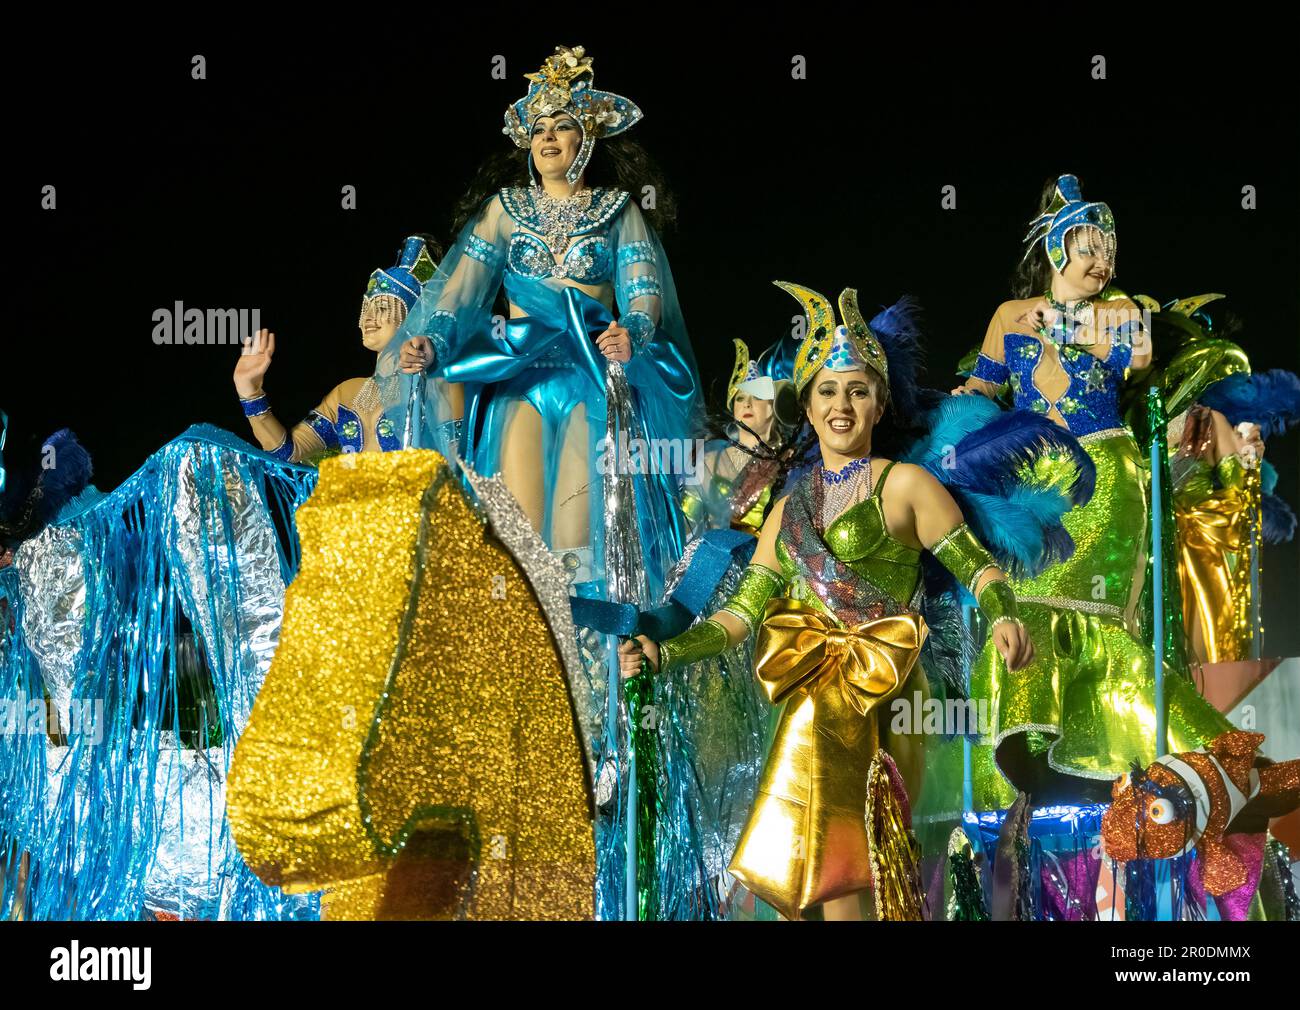 The February Carnival, Funchal, Madeira, Portugal Stock Photo